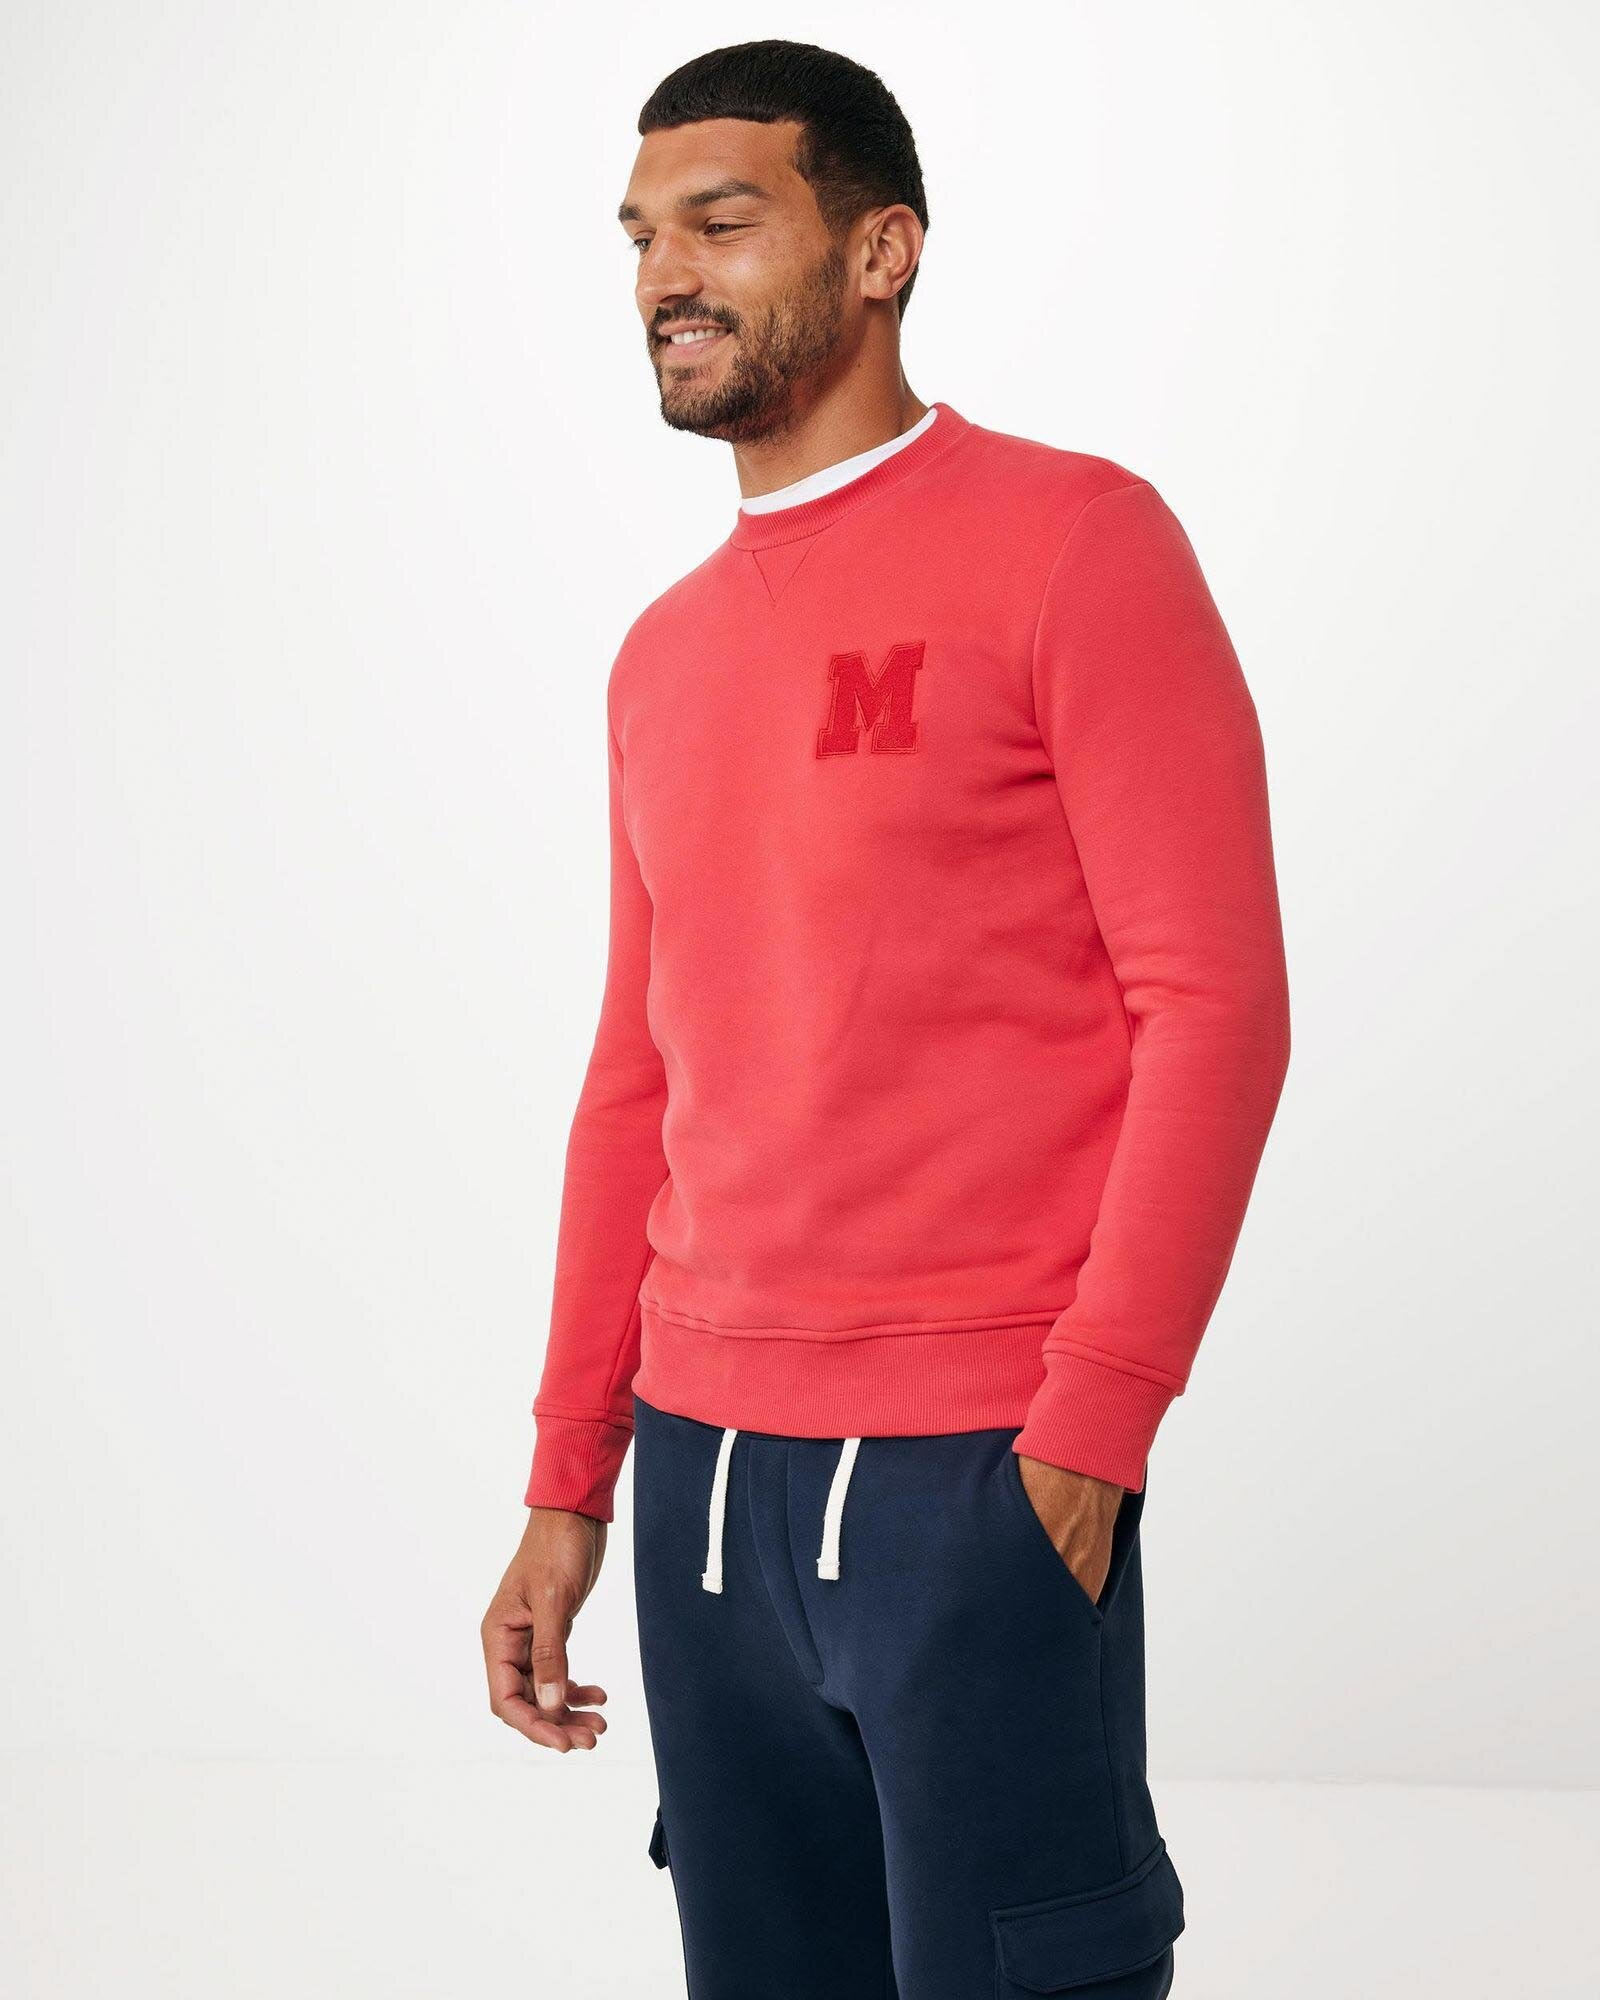 Mexx Crew Neck Sweatshirt With Embroidery Mannen - Bright Rood - Maat S